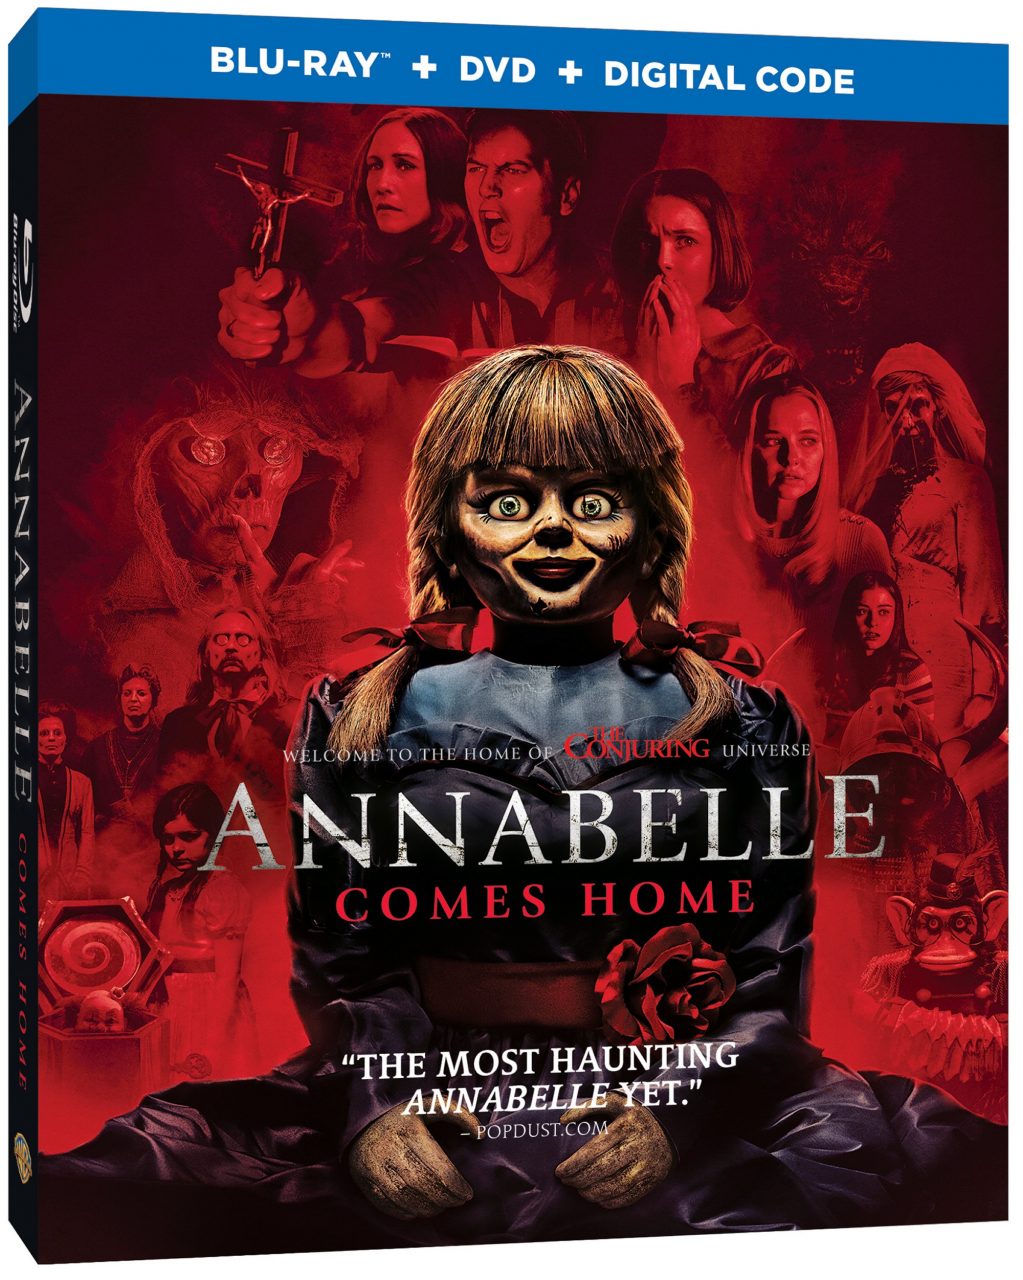 Annabelle Comes Home Blu-Ray Combo Pack cover (Warner Bros. Home Entertainment)